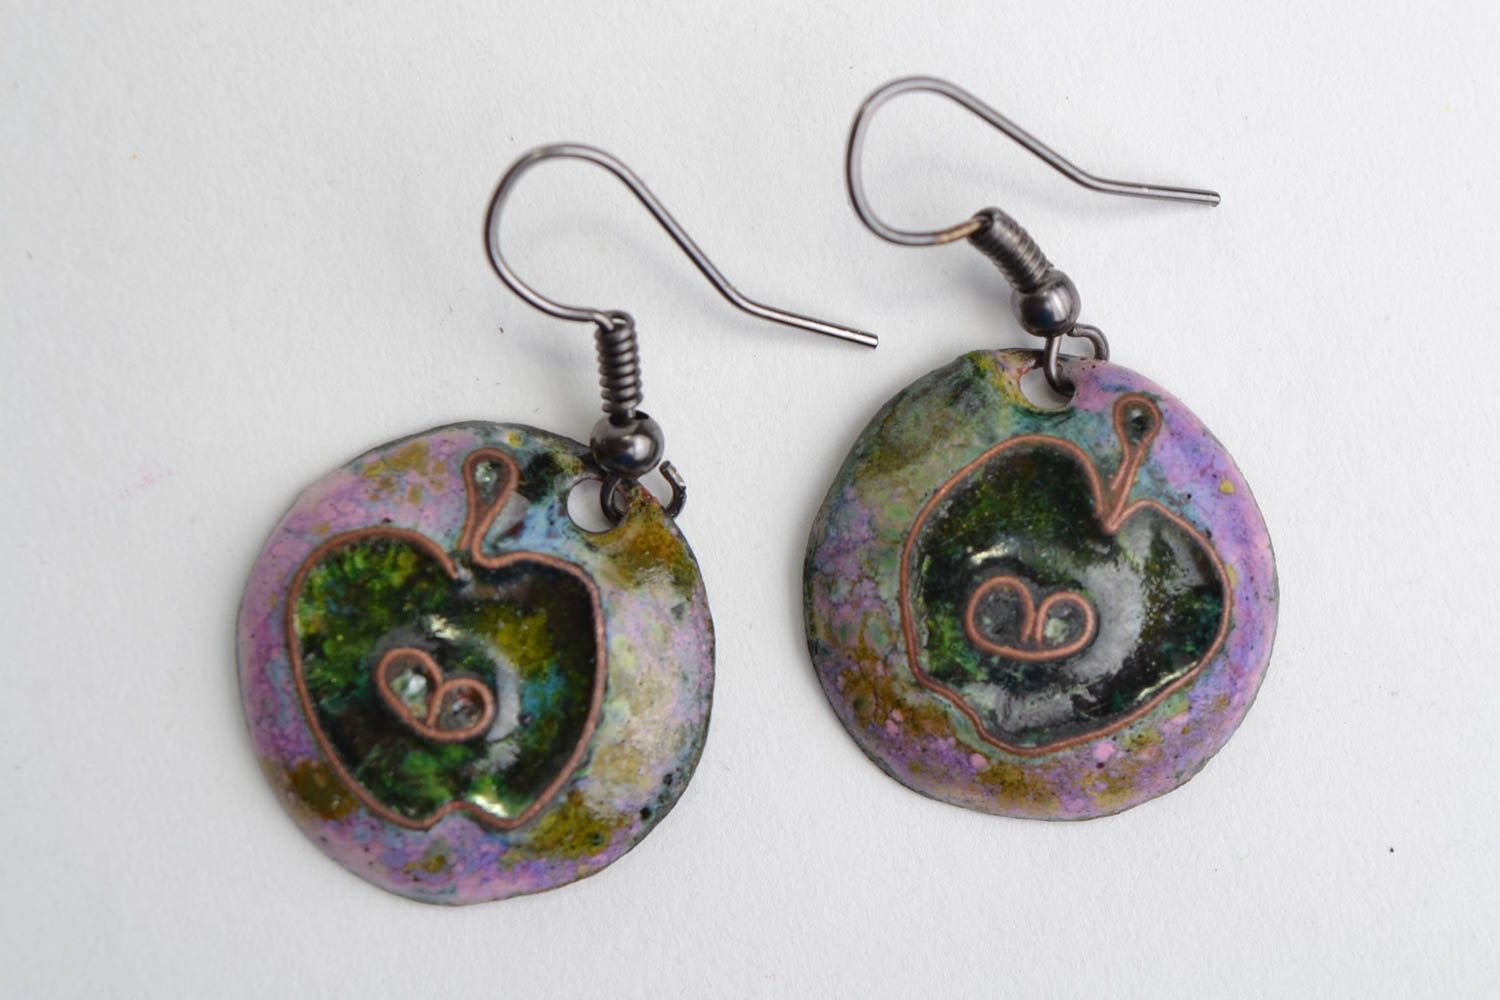 Handmade round violet enameled copper dangling earrings with apples images photo 1